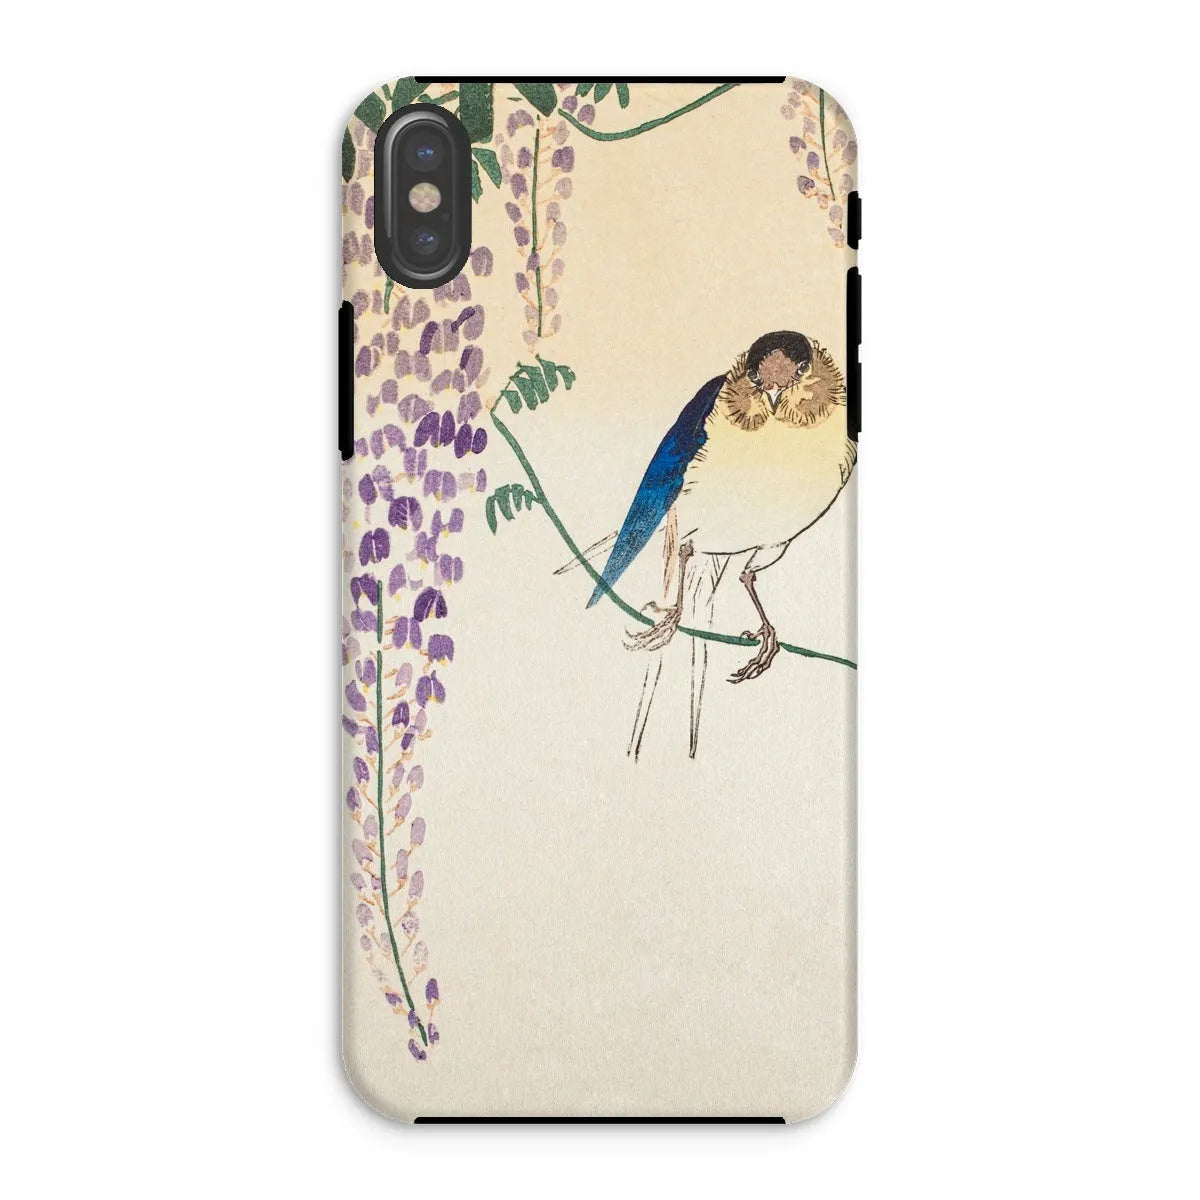 Wisteria And Swallow - Japanese Art Phone Case - Ohara Koson - Iphone Xs / Matte - Mobile Phone Cases - Aesthetic Art